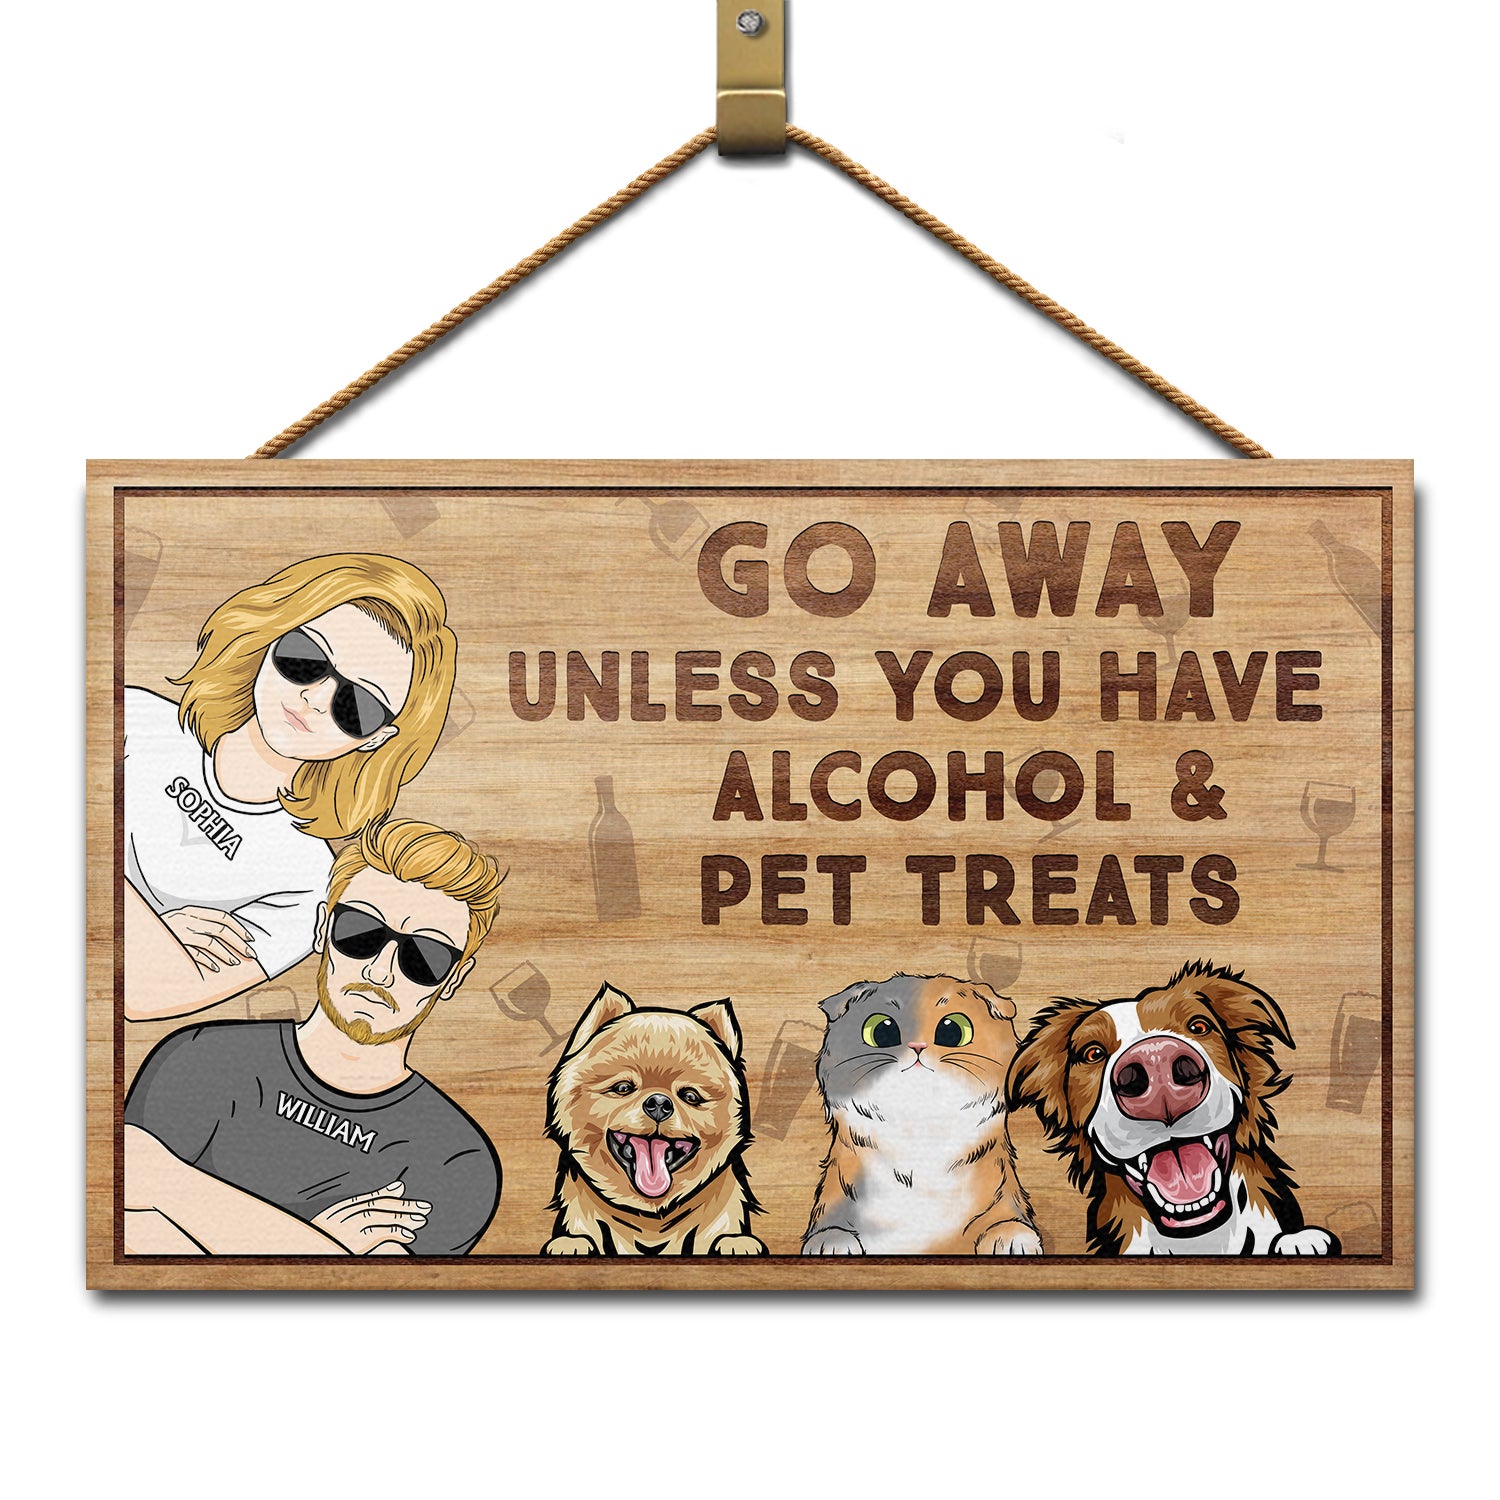 Go Away Unless You Have Alcohol And Dog Treats Cat Treats Pet Treats Couples - Home Decor, Birthday, Housewarming Gift For Dog Lovers & Cat Lovers - Personalized Custom Wood Rectangle Sign